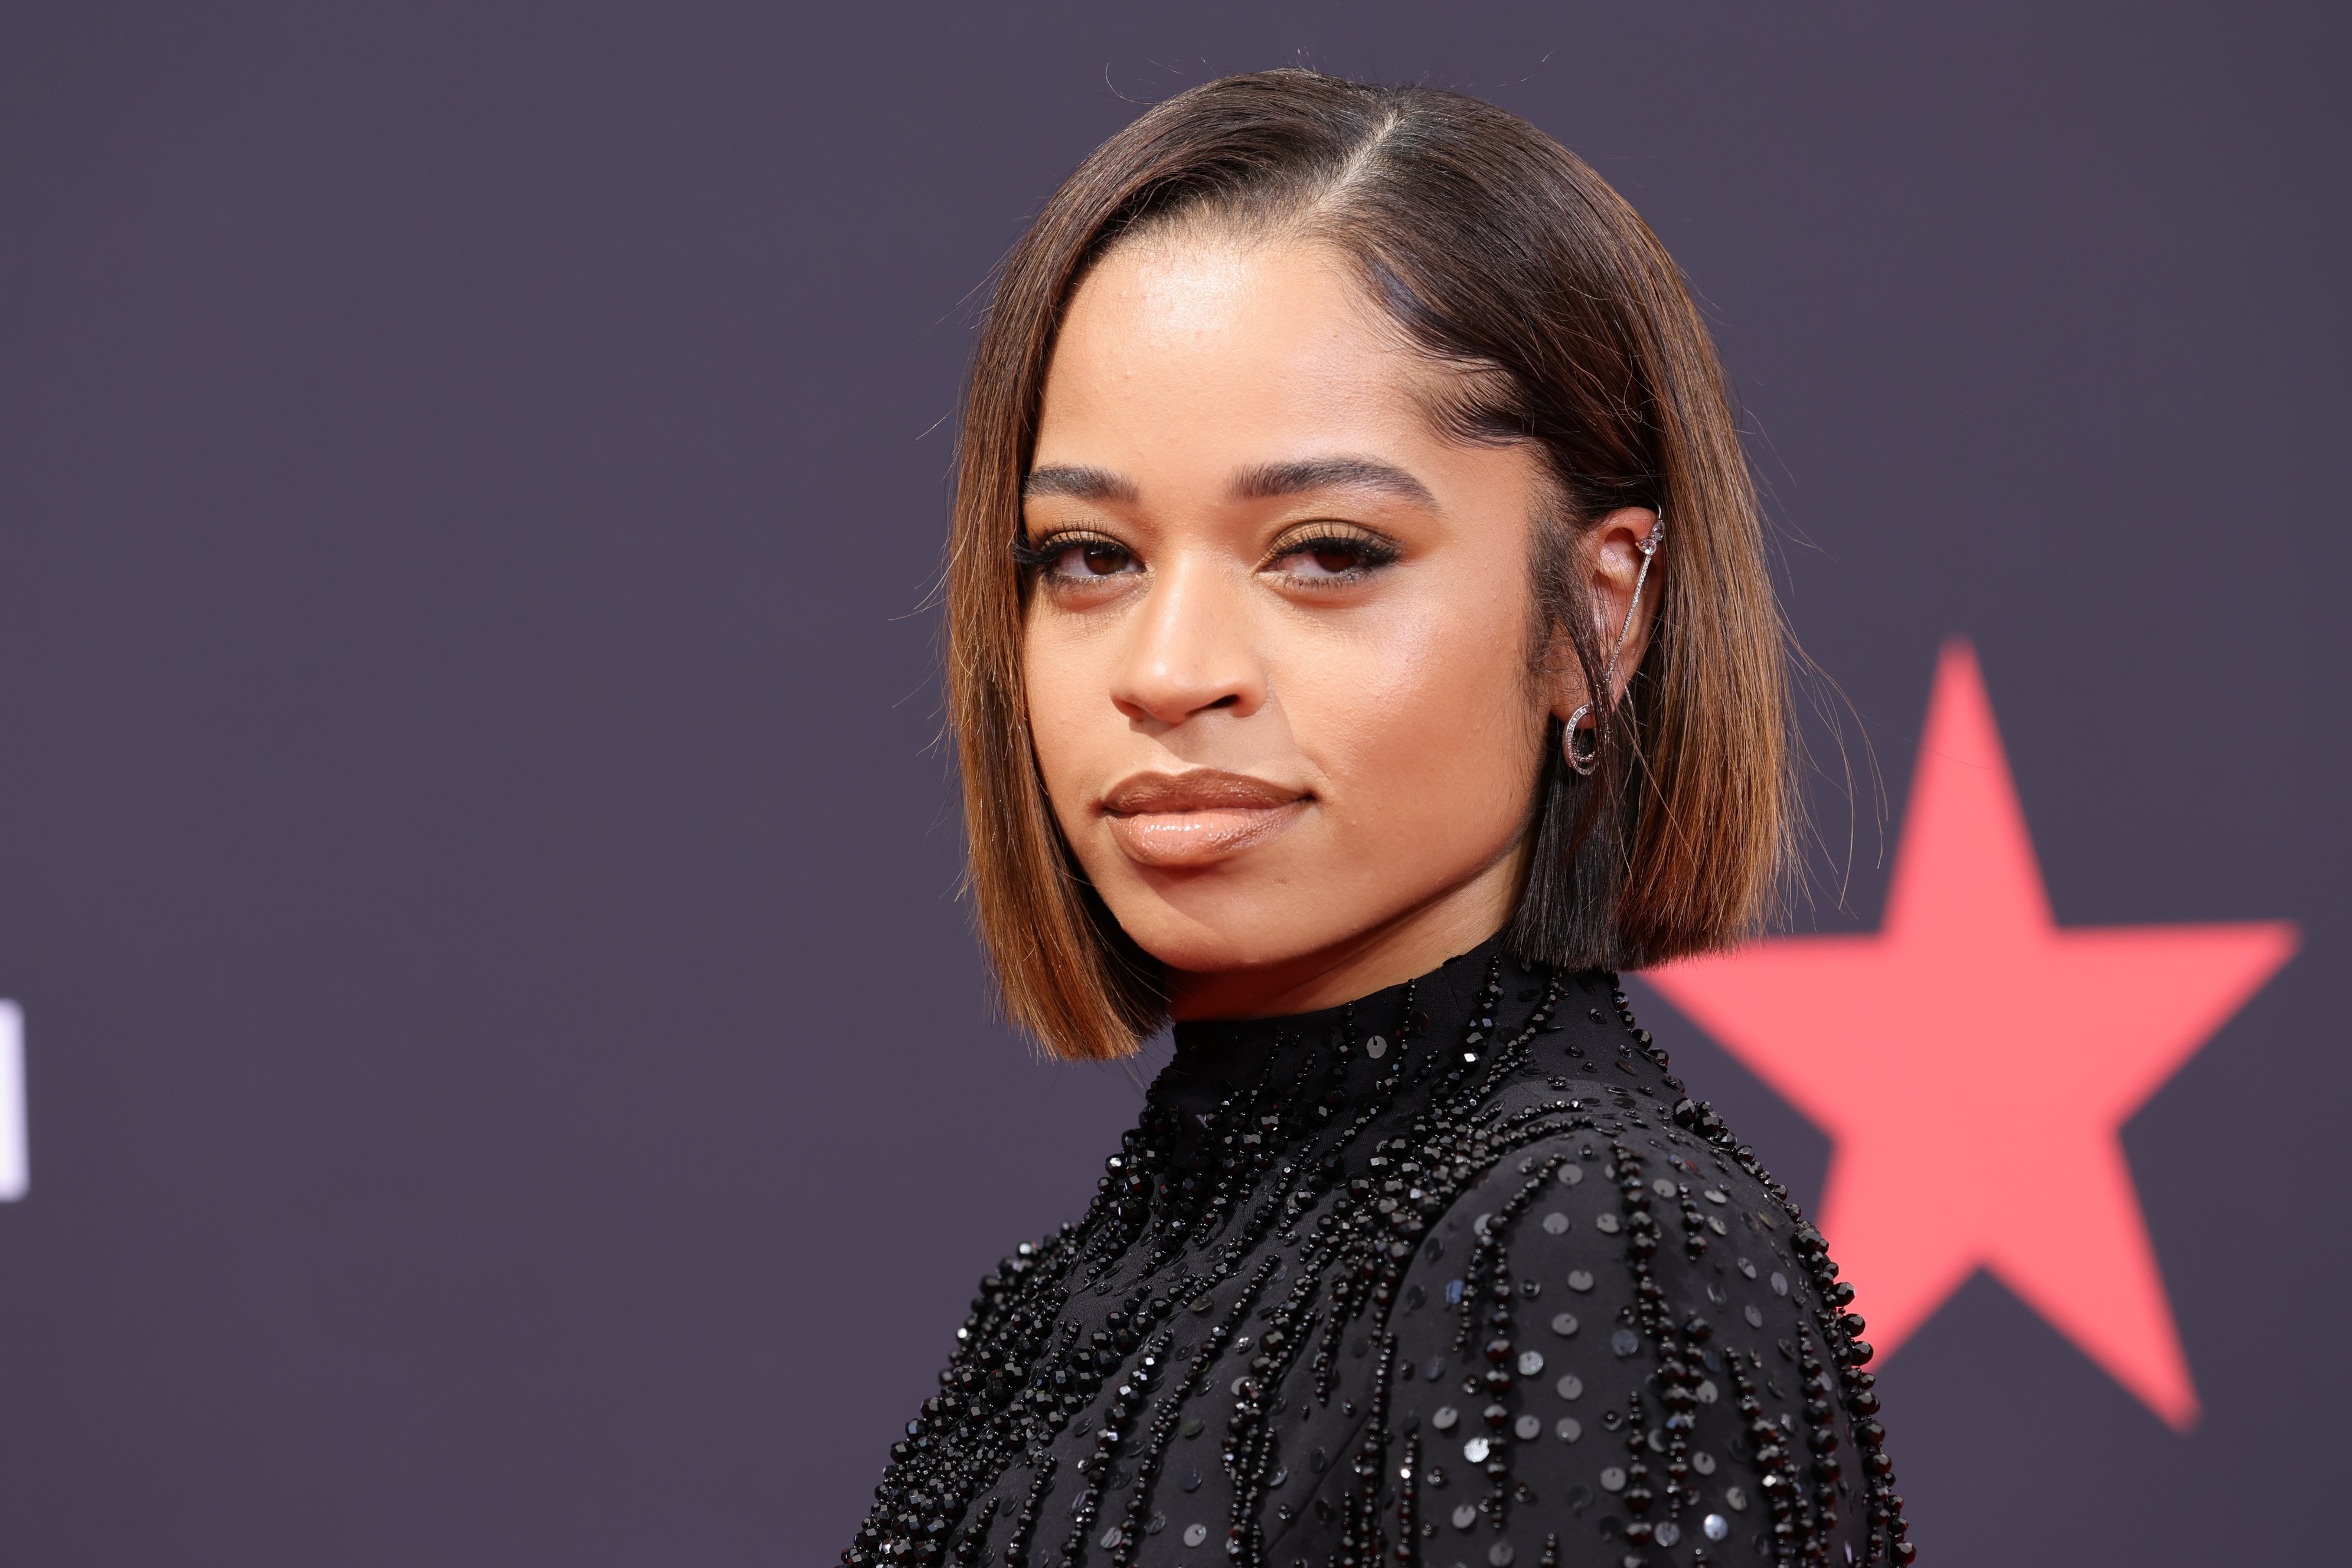 Ella Mai attends the 2022 BET Awards at Microsoft Theater on June 26, 2022 in Los Angeles, California. | Source: Getty Images